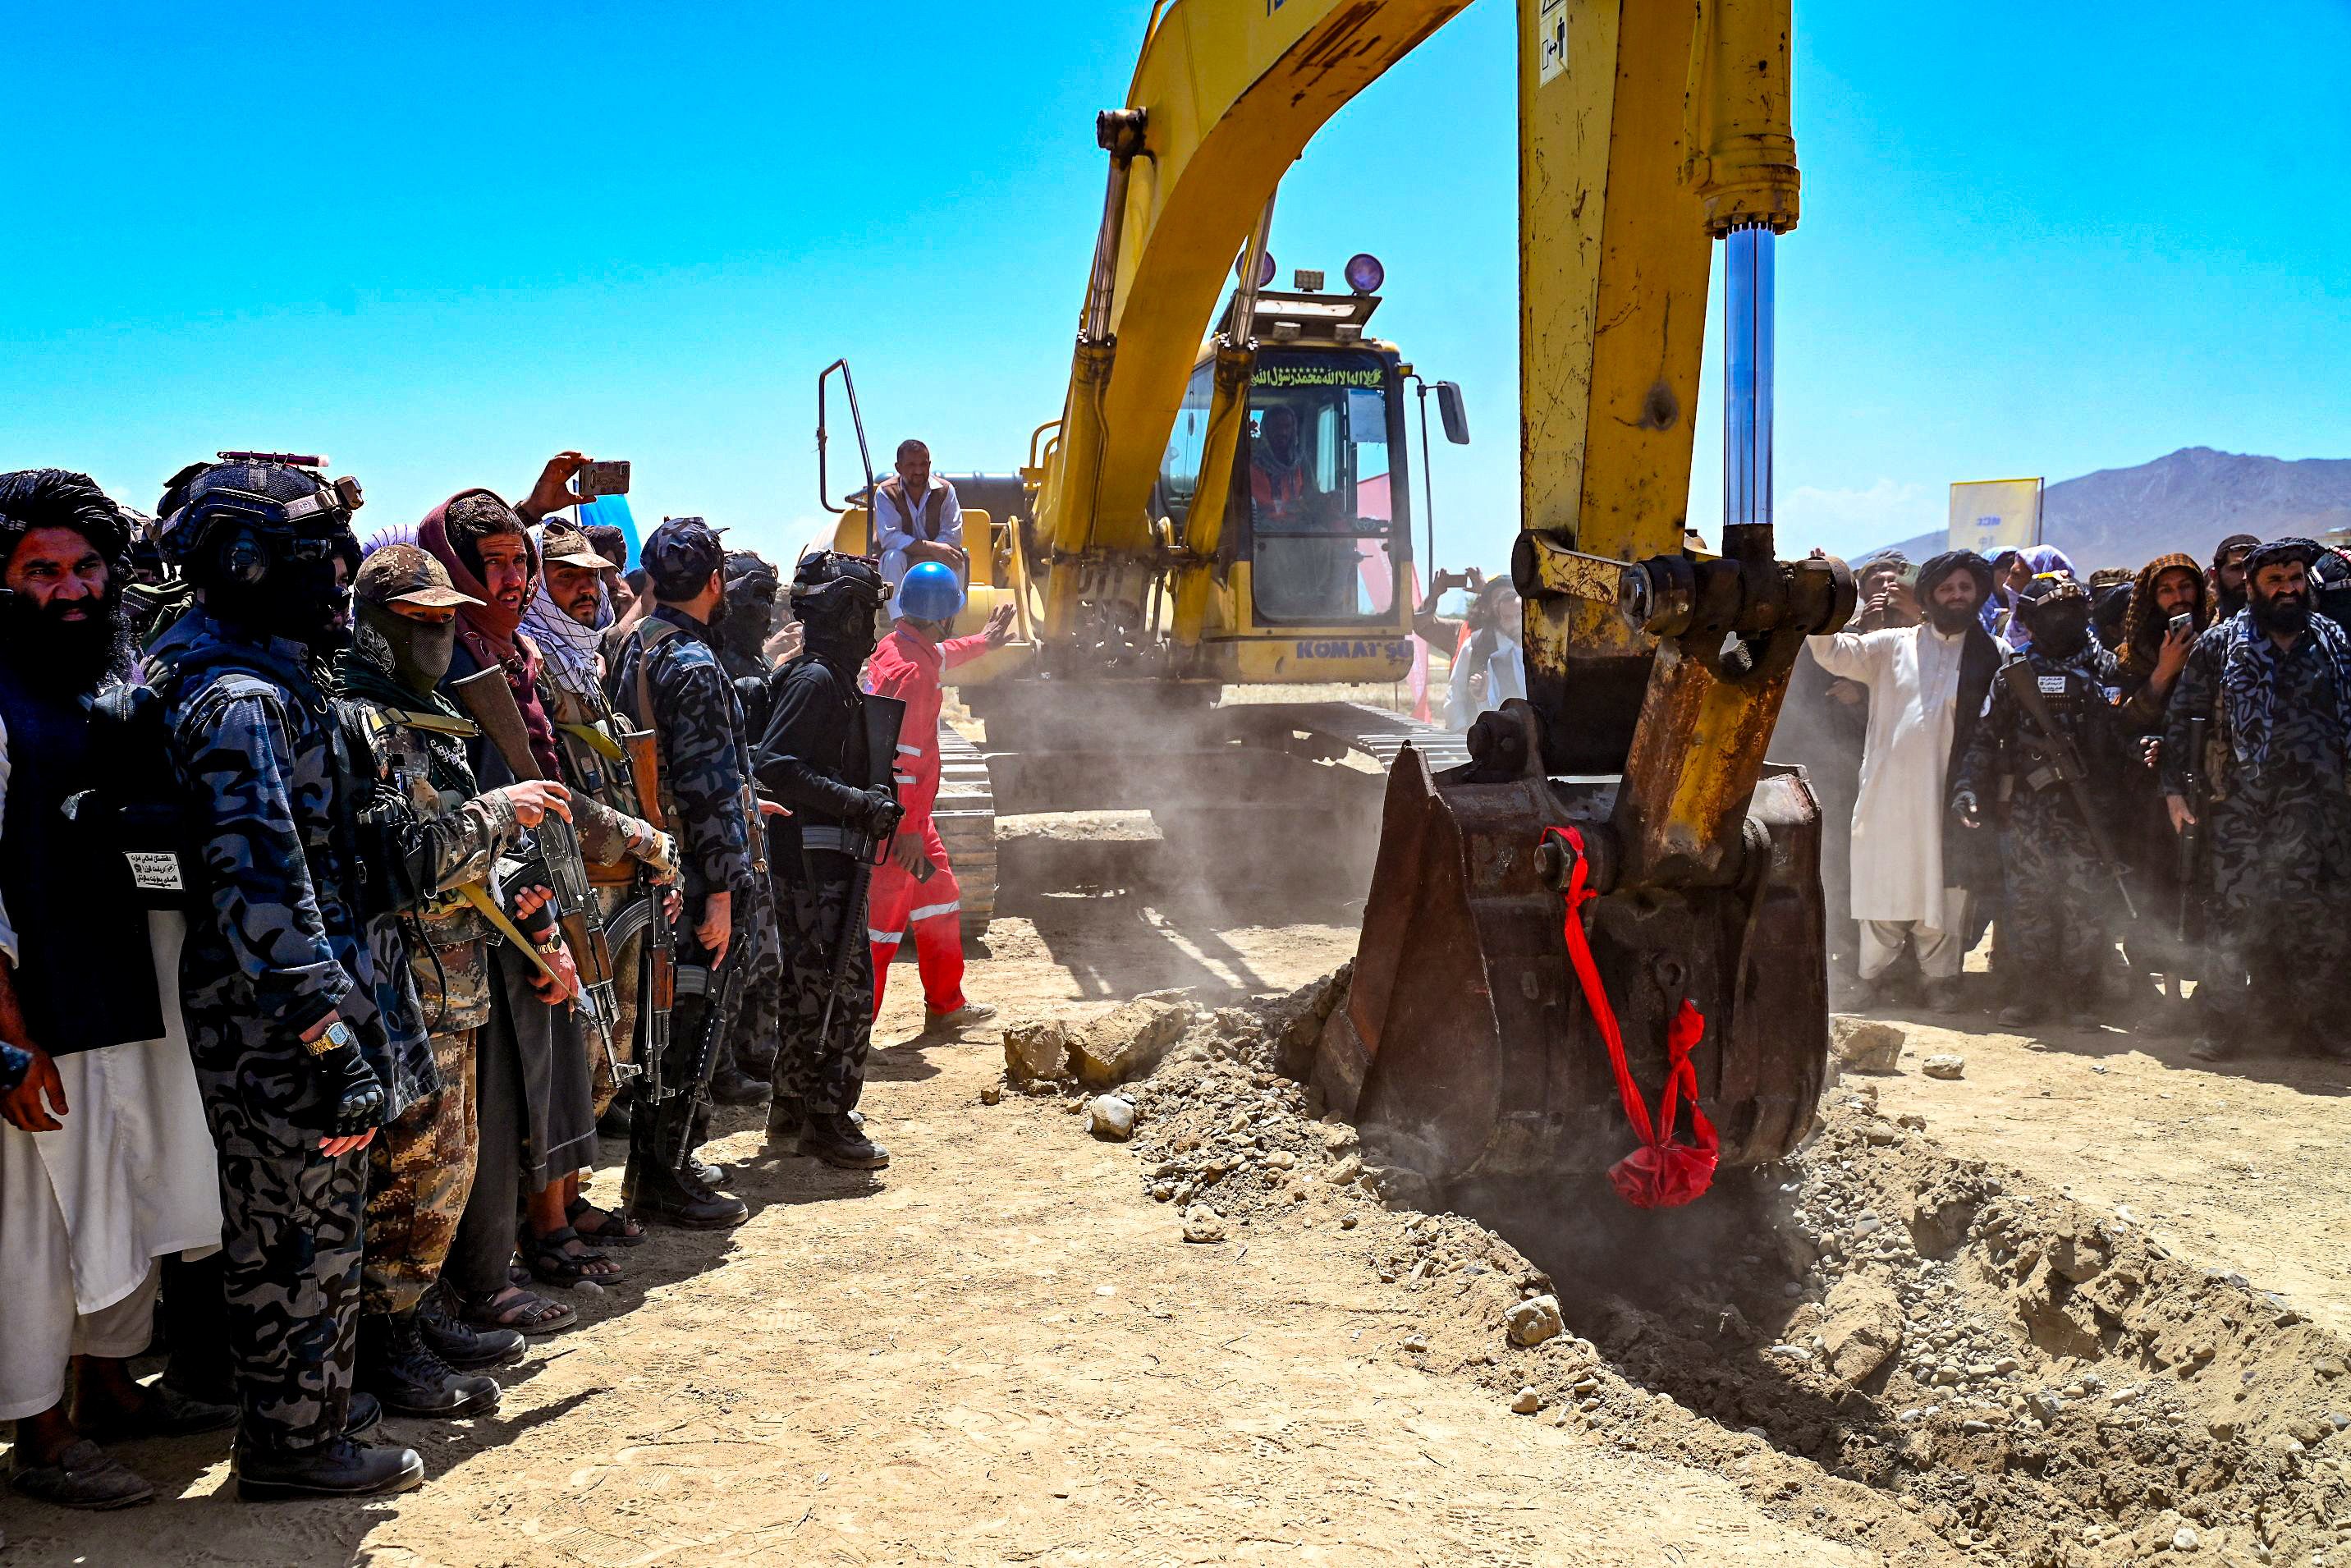 Taliban security personnel surround an excavator during the inauguration ceremony. Photo:  AFP